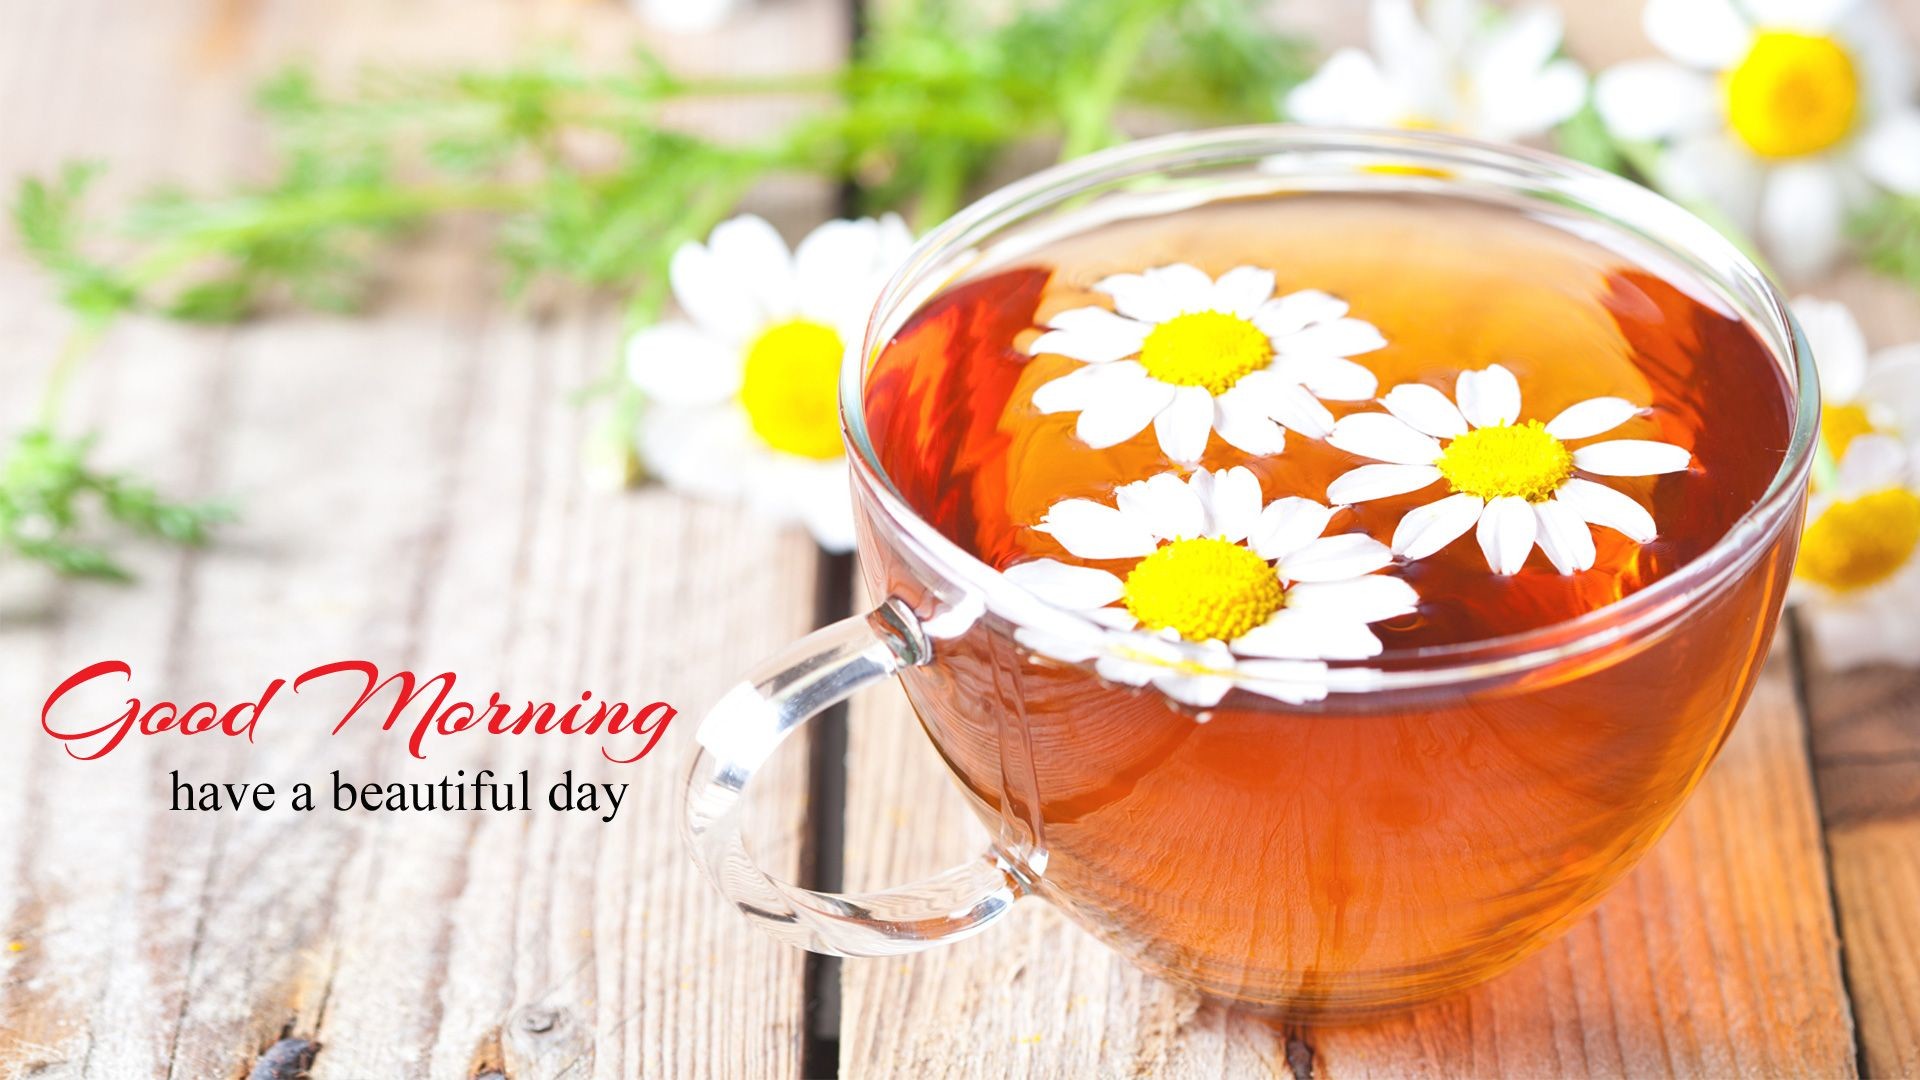 1920x1080 Simple and Beautiful Good Morning Wallpaper with flowers in Full HD size. # goodmorning #wallpaper #hd #gm #gmwallpaper #flower #cup #tea #beautiful  #day